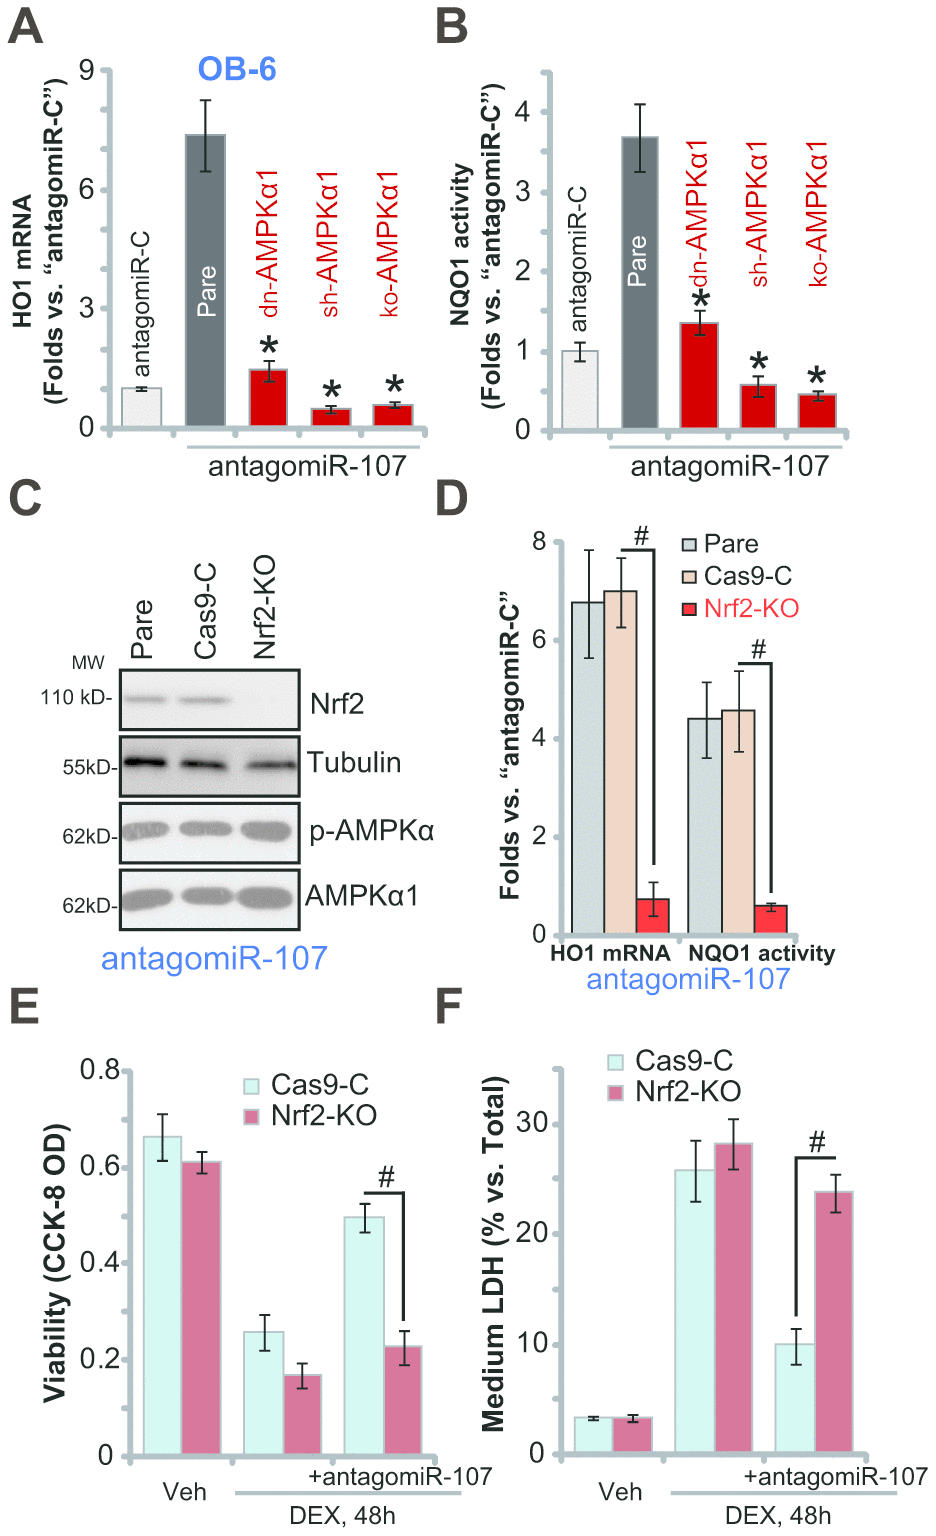 AMPK downstream Nrf2 cascade activation is required for antagomiR-107-induced osteoblast cytoprotection against DEX. Stable OB-6 cells, with the dominant negative AMPKα1 (dn-AMPKα1, T172A) construct, the lentiviral AMPKα1 shRNA (sh-AMPKα1), the CRISPR-Cas-9-AMPKα1 KO plasmid (ko-AMPKα1), as well as the parental control cells, were infected with antagomiR-107 lentivirus for 48h, relative HO1 mRNA expression (vs. “antagomiR-C” cells, A) and NQO1 activity (vs. “antagomiR-C” cells, B) were shown. Stable OB-6 cells, with the CRISPR-Cas-9-Nrf2 KO plasmid (“ko-Nrf2”) or CRISPR-Cas-9-control construct (“Cas9-C”), as well as the parental control cells were infected with antagomiR-107 lentivirus for 48h, expression of listed proteins was shown (C), relative HO1 mRNA expression and NQO1 activity (vs. “antagomiR-C” cells, D) were tested. Alternatively, cells were also treated with DEX (1 μM) or the vehicle control (“Veh”) for another 48h, cell viability (CCK-8 OD, E) and cell death (medium LDH release, F) were tested. Data were mean ± standard deviation (SD, n=5). * pvs. “Pare” cells (A, B). # pD–F). Each experiment was repeated three times and similar results were obtained.